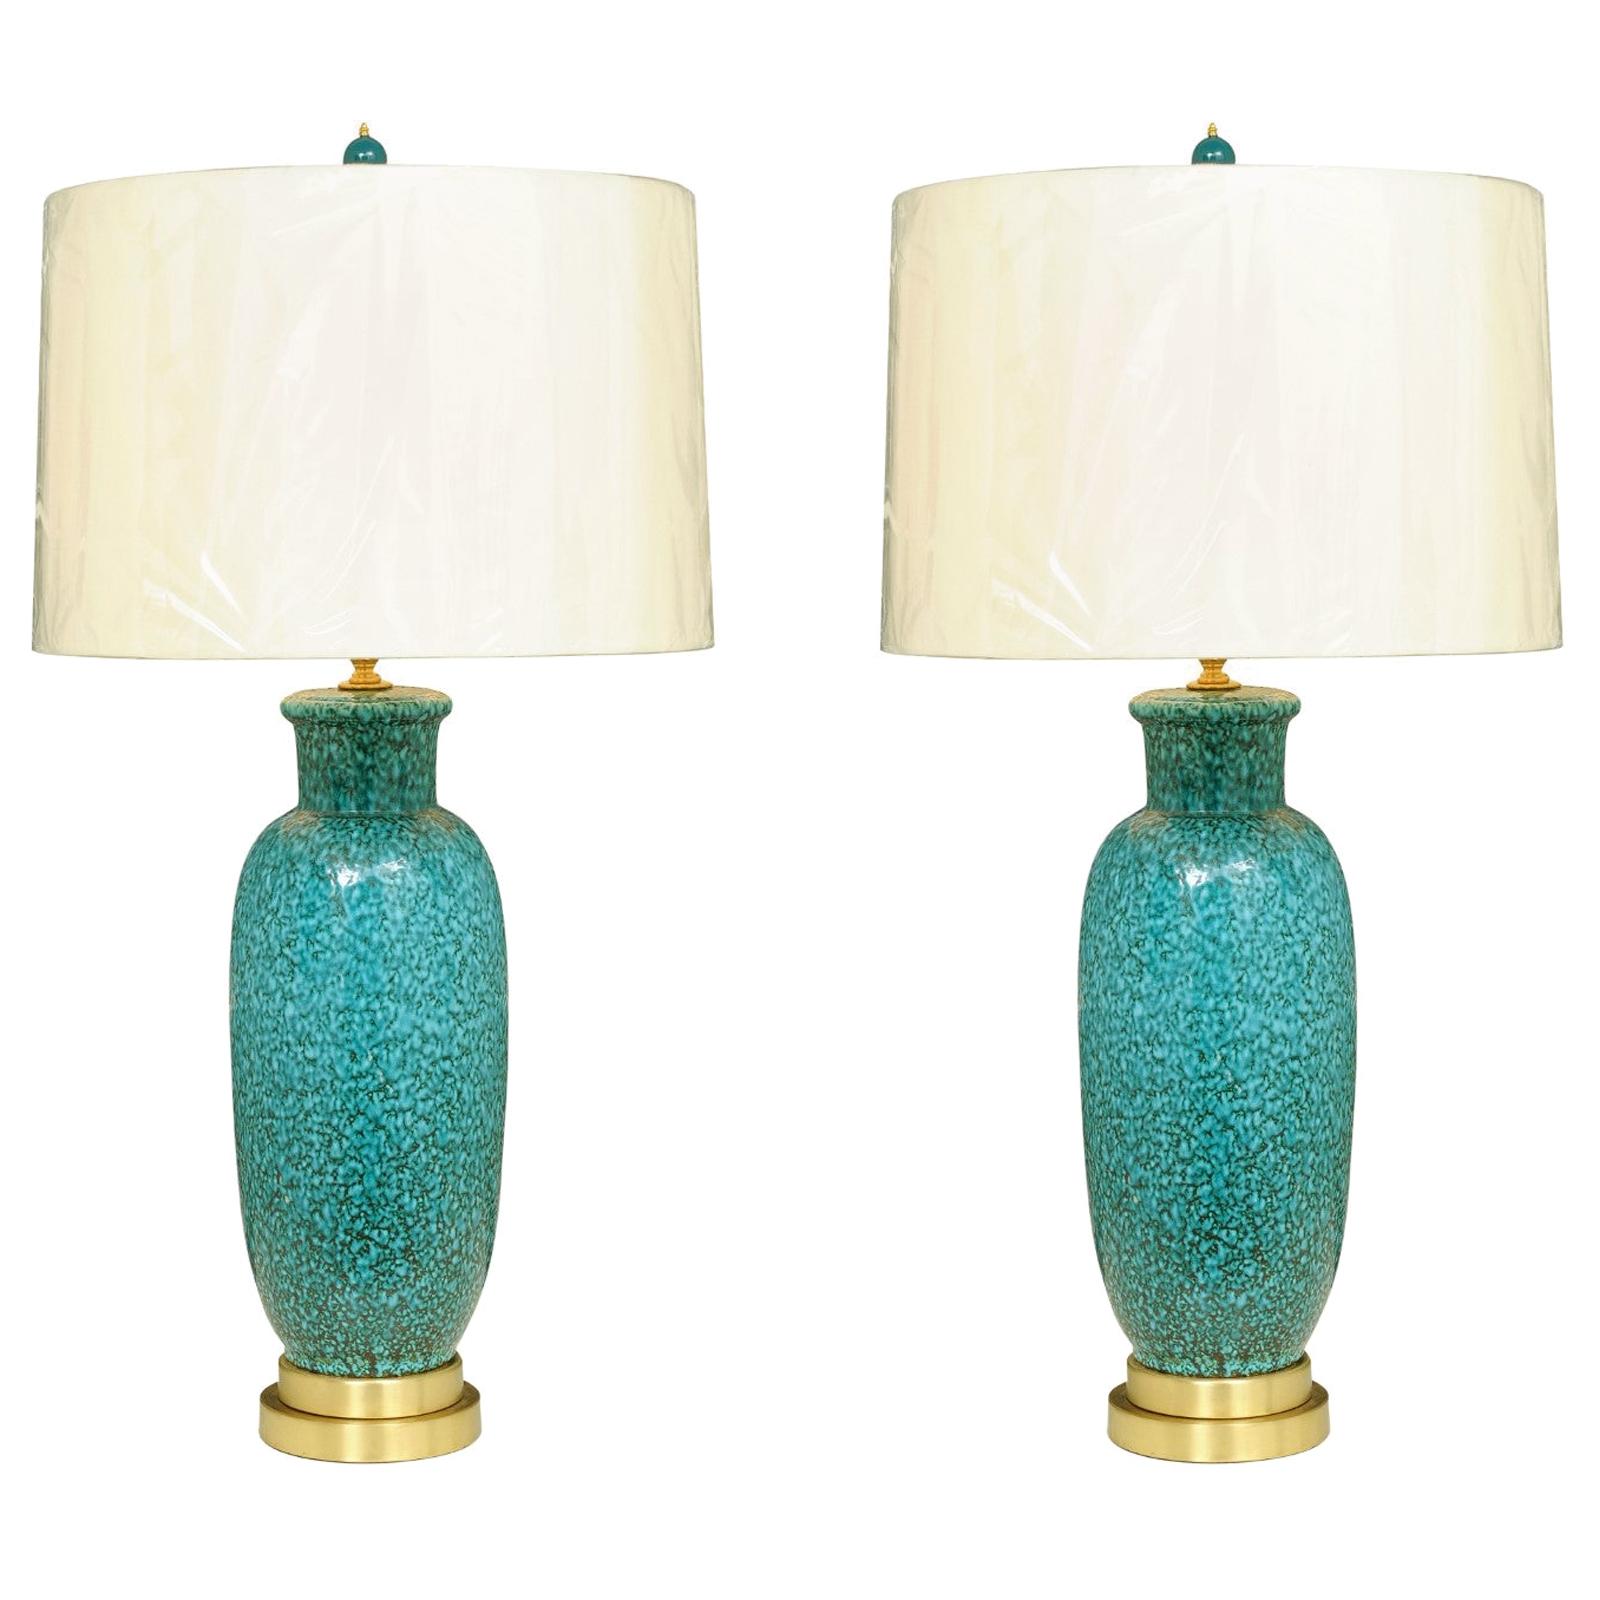 Exceptional Pair of Restored Italian Ceramic Lamps in Turquoise, circa 1960 For Sale